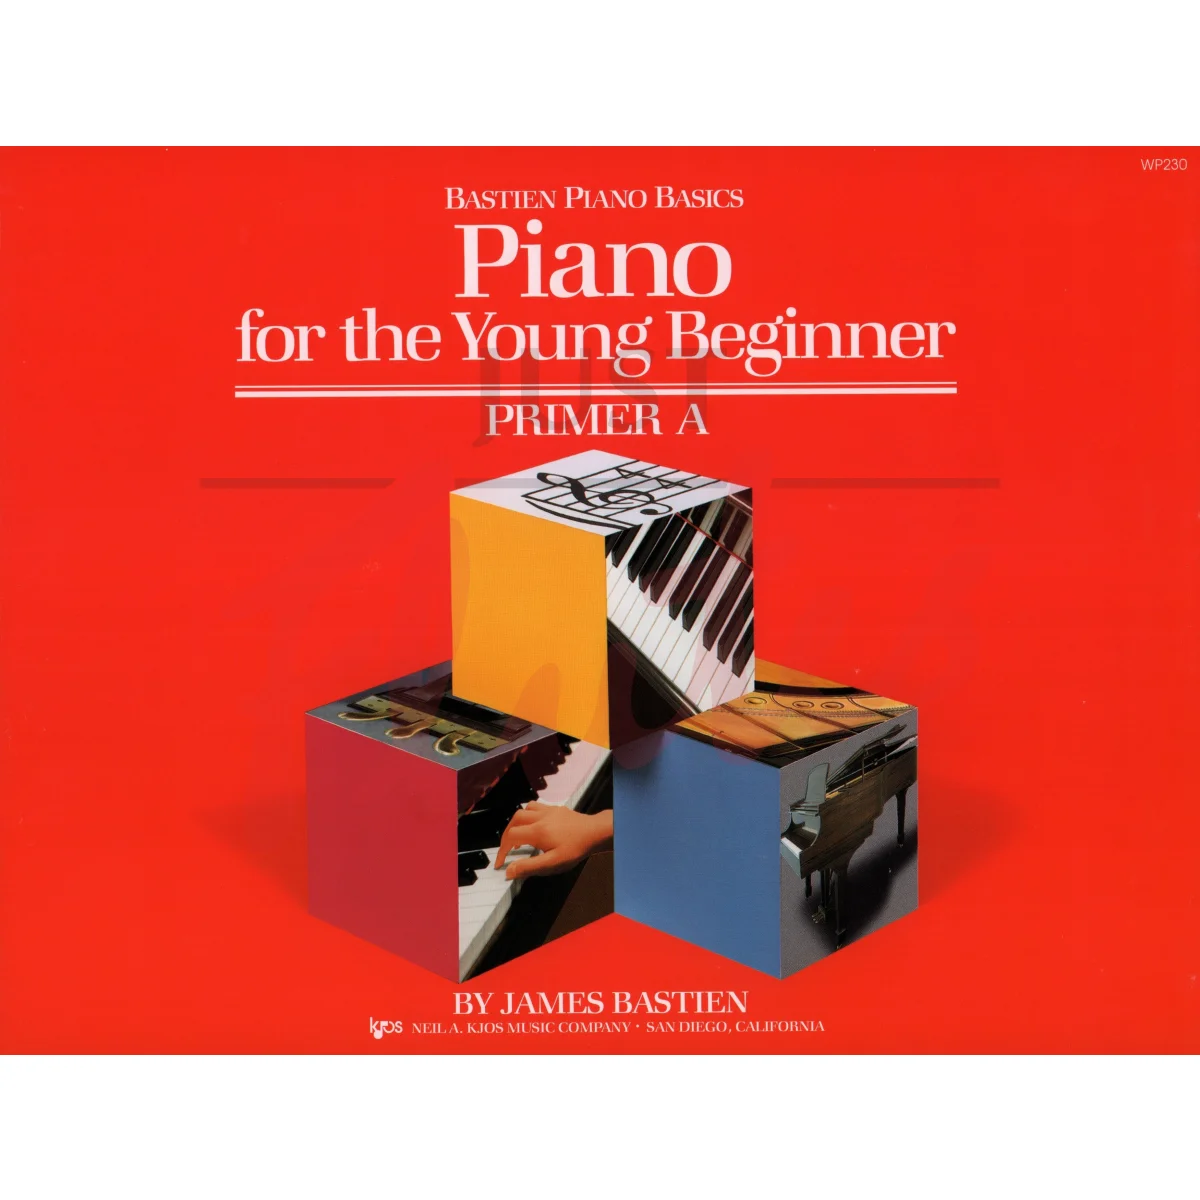 Piano for the Young Beginner: Primer A